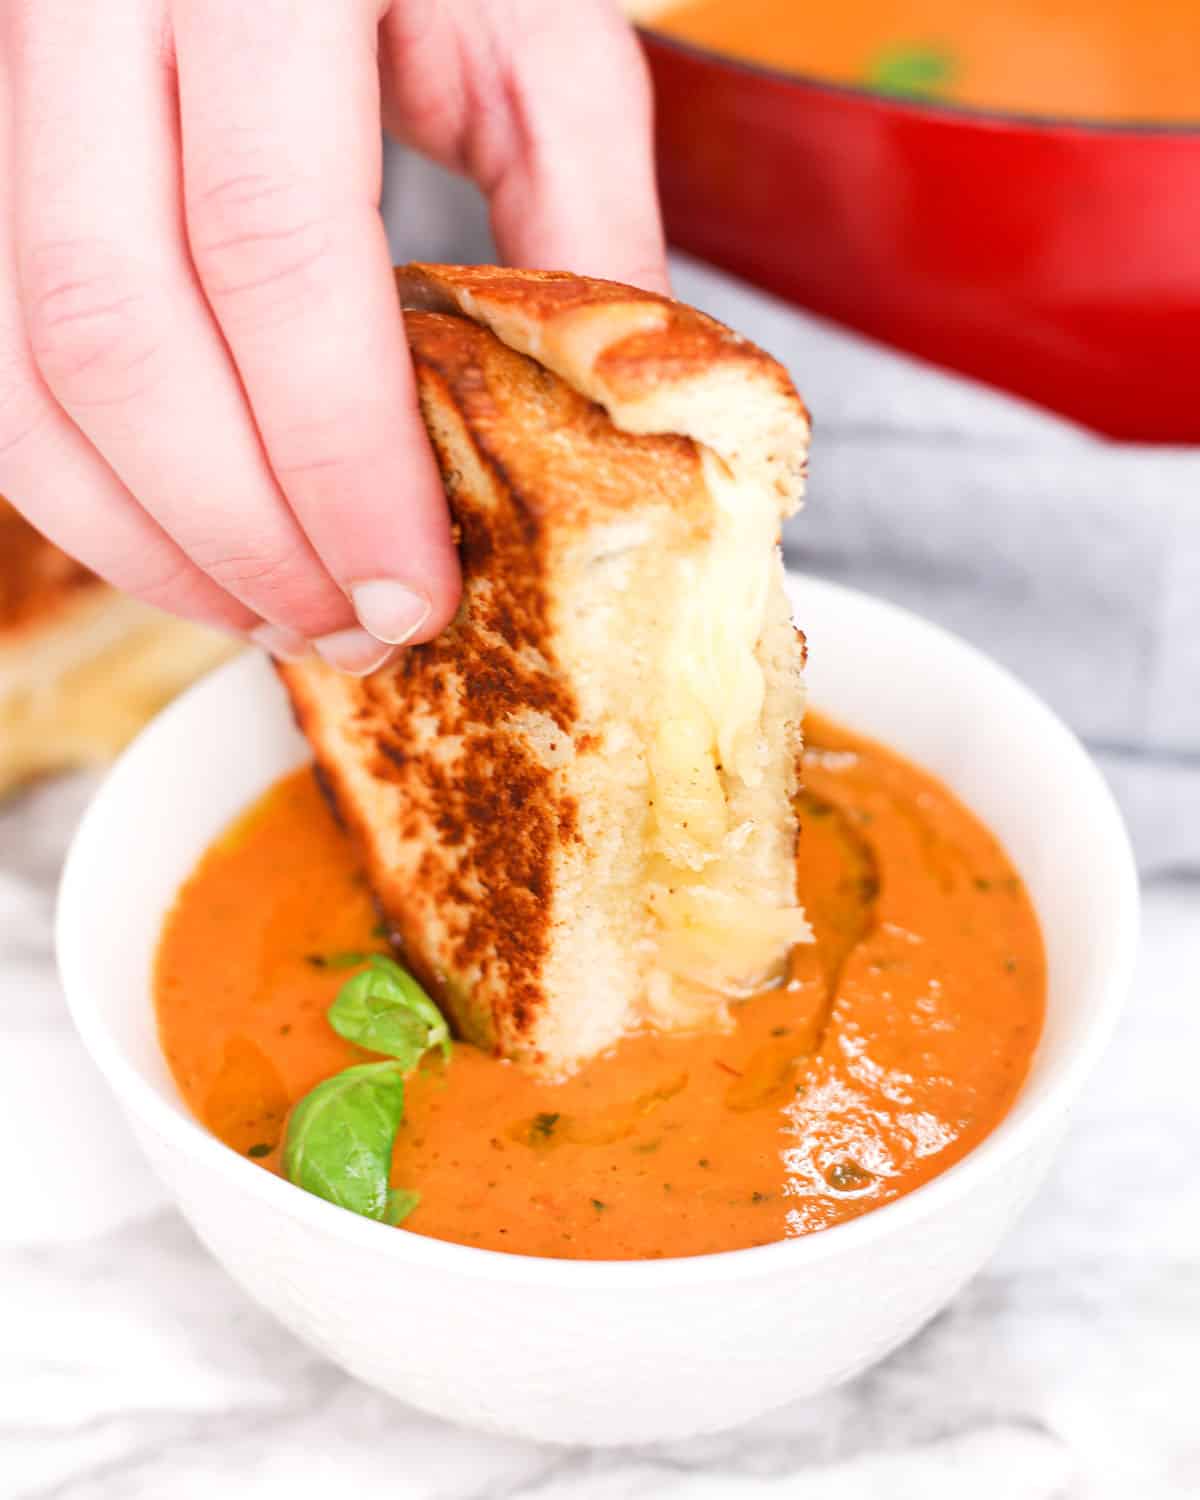 dipping a grilled cheese sandwich into roasted tomato soup